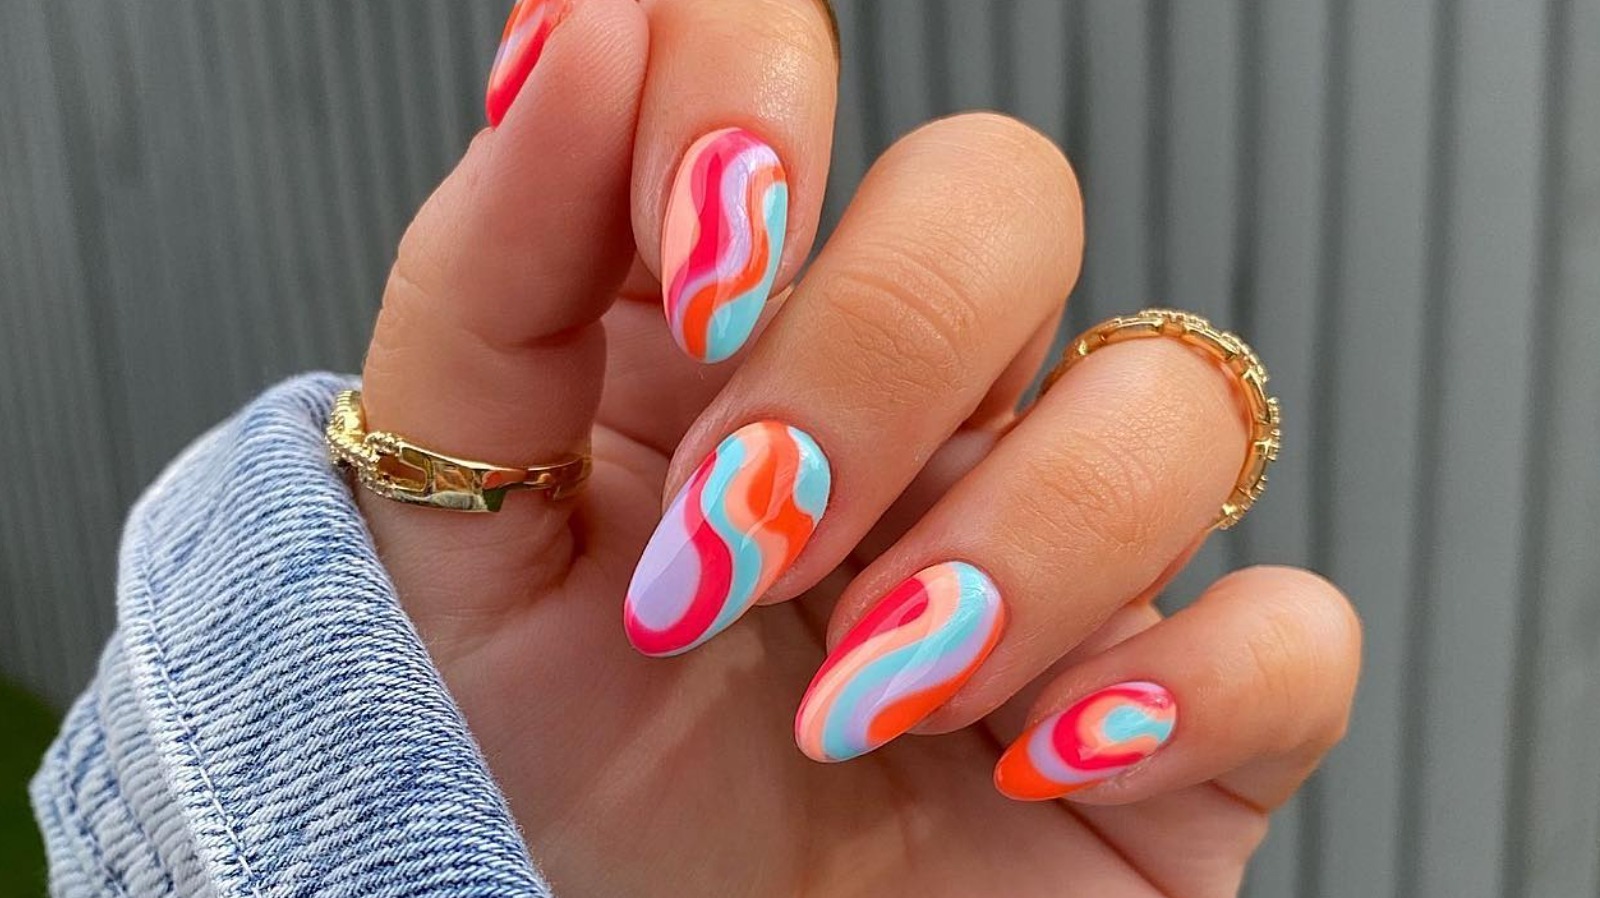 6. Cute French Tip Nails with a Twist - wide 1